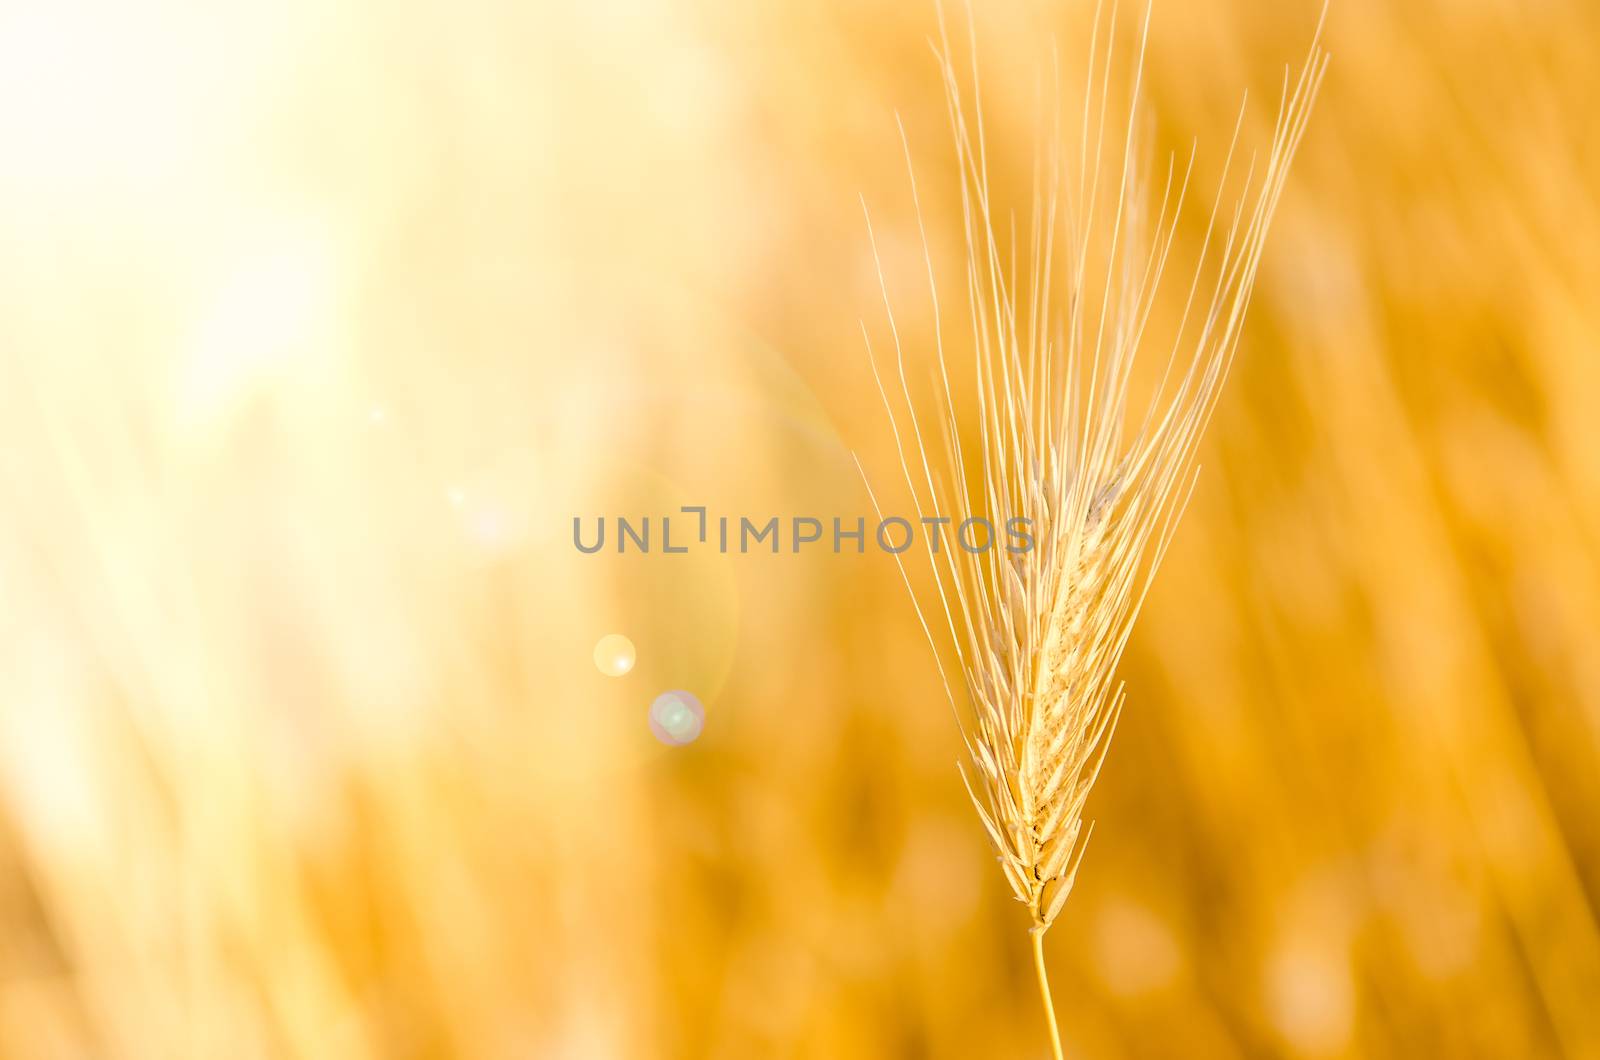 Detail of barley with nice bright bokeh background